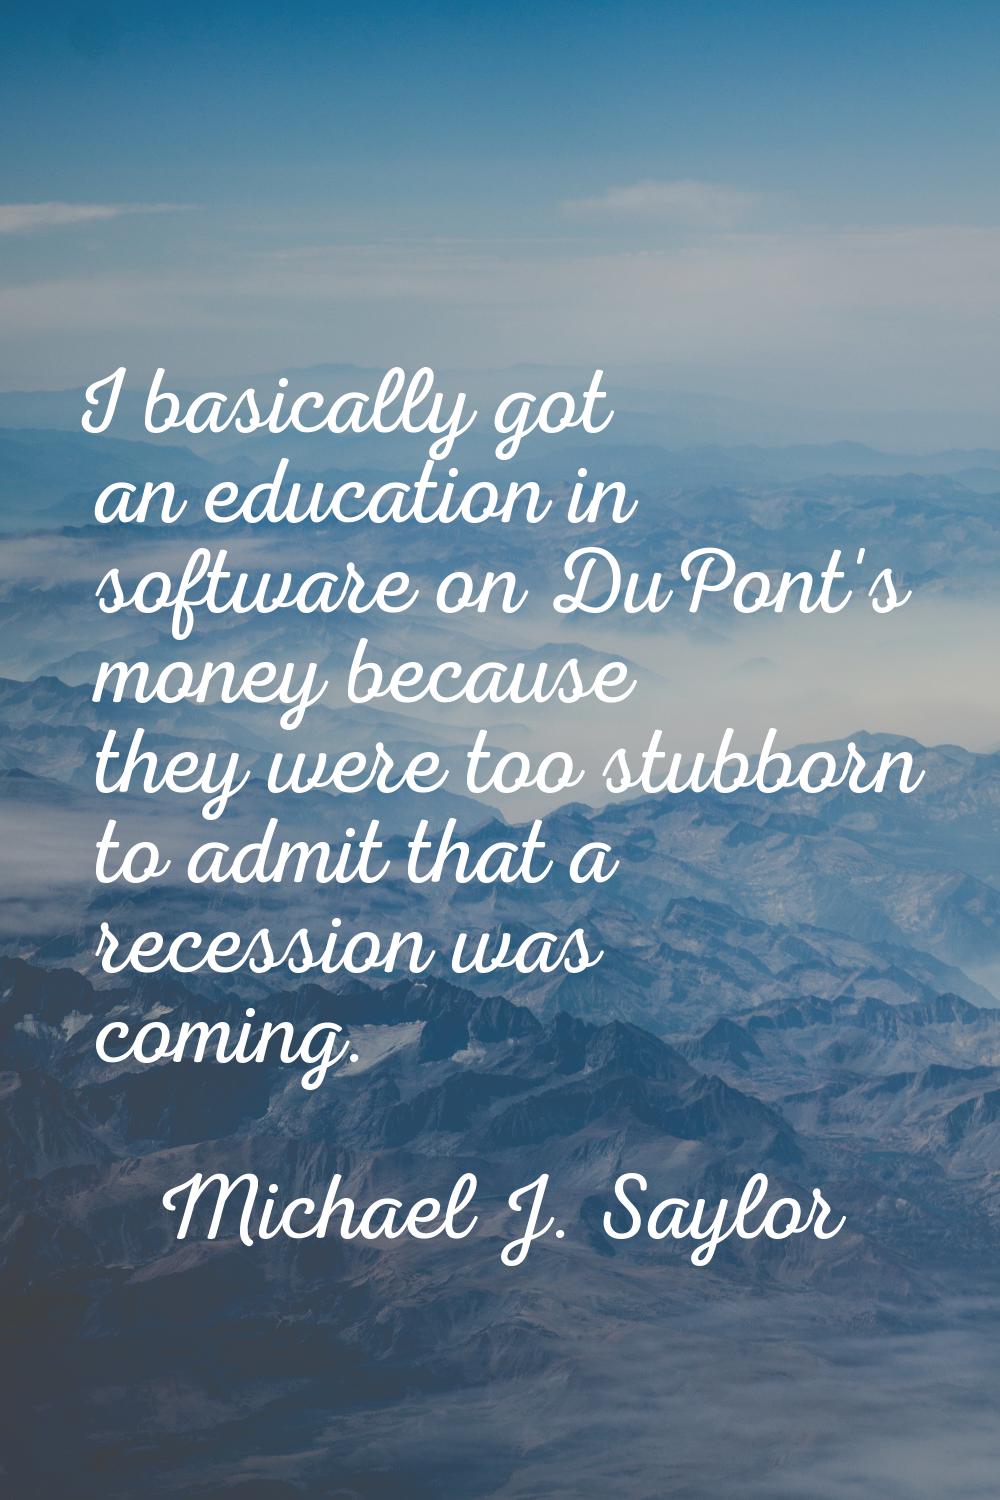 I basically got an education in software on DuPont's money because they were too stubborn to admit 